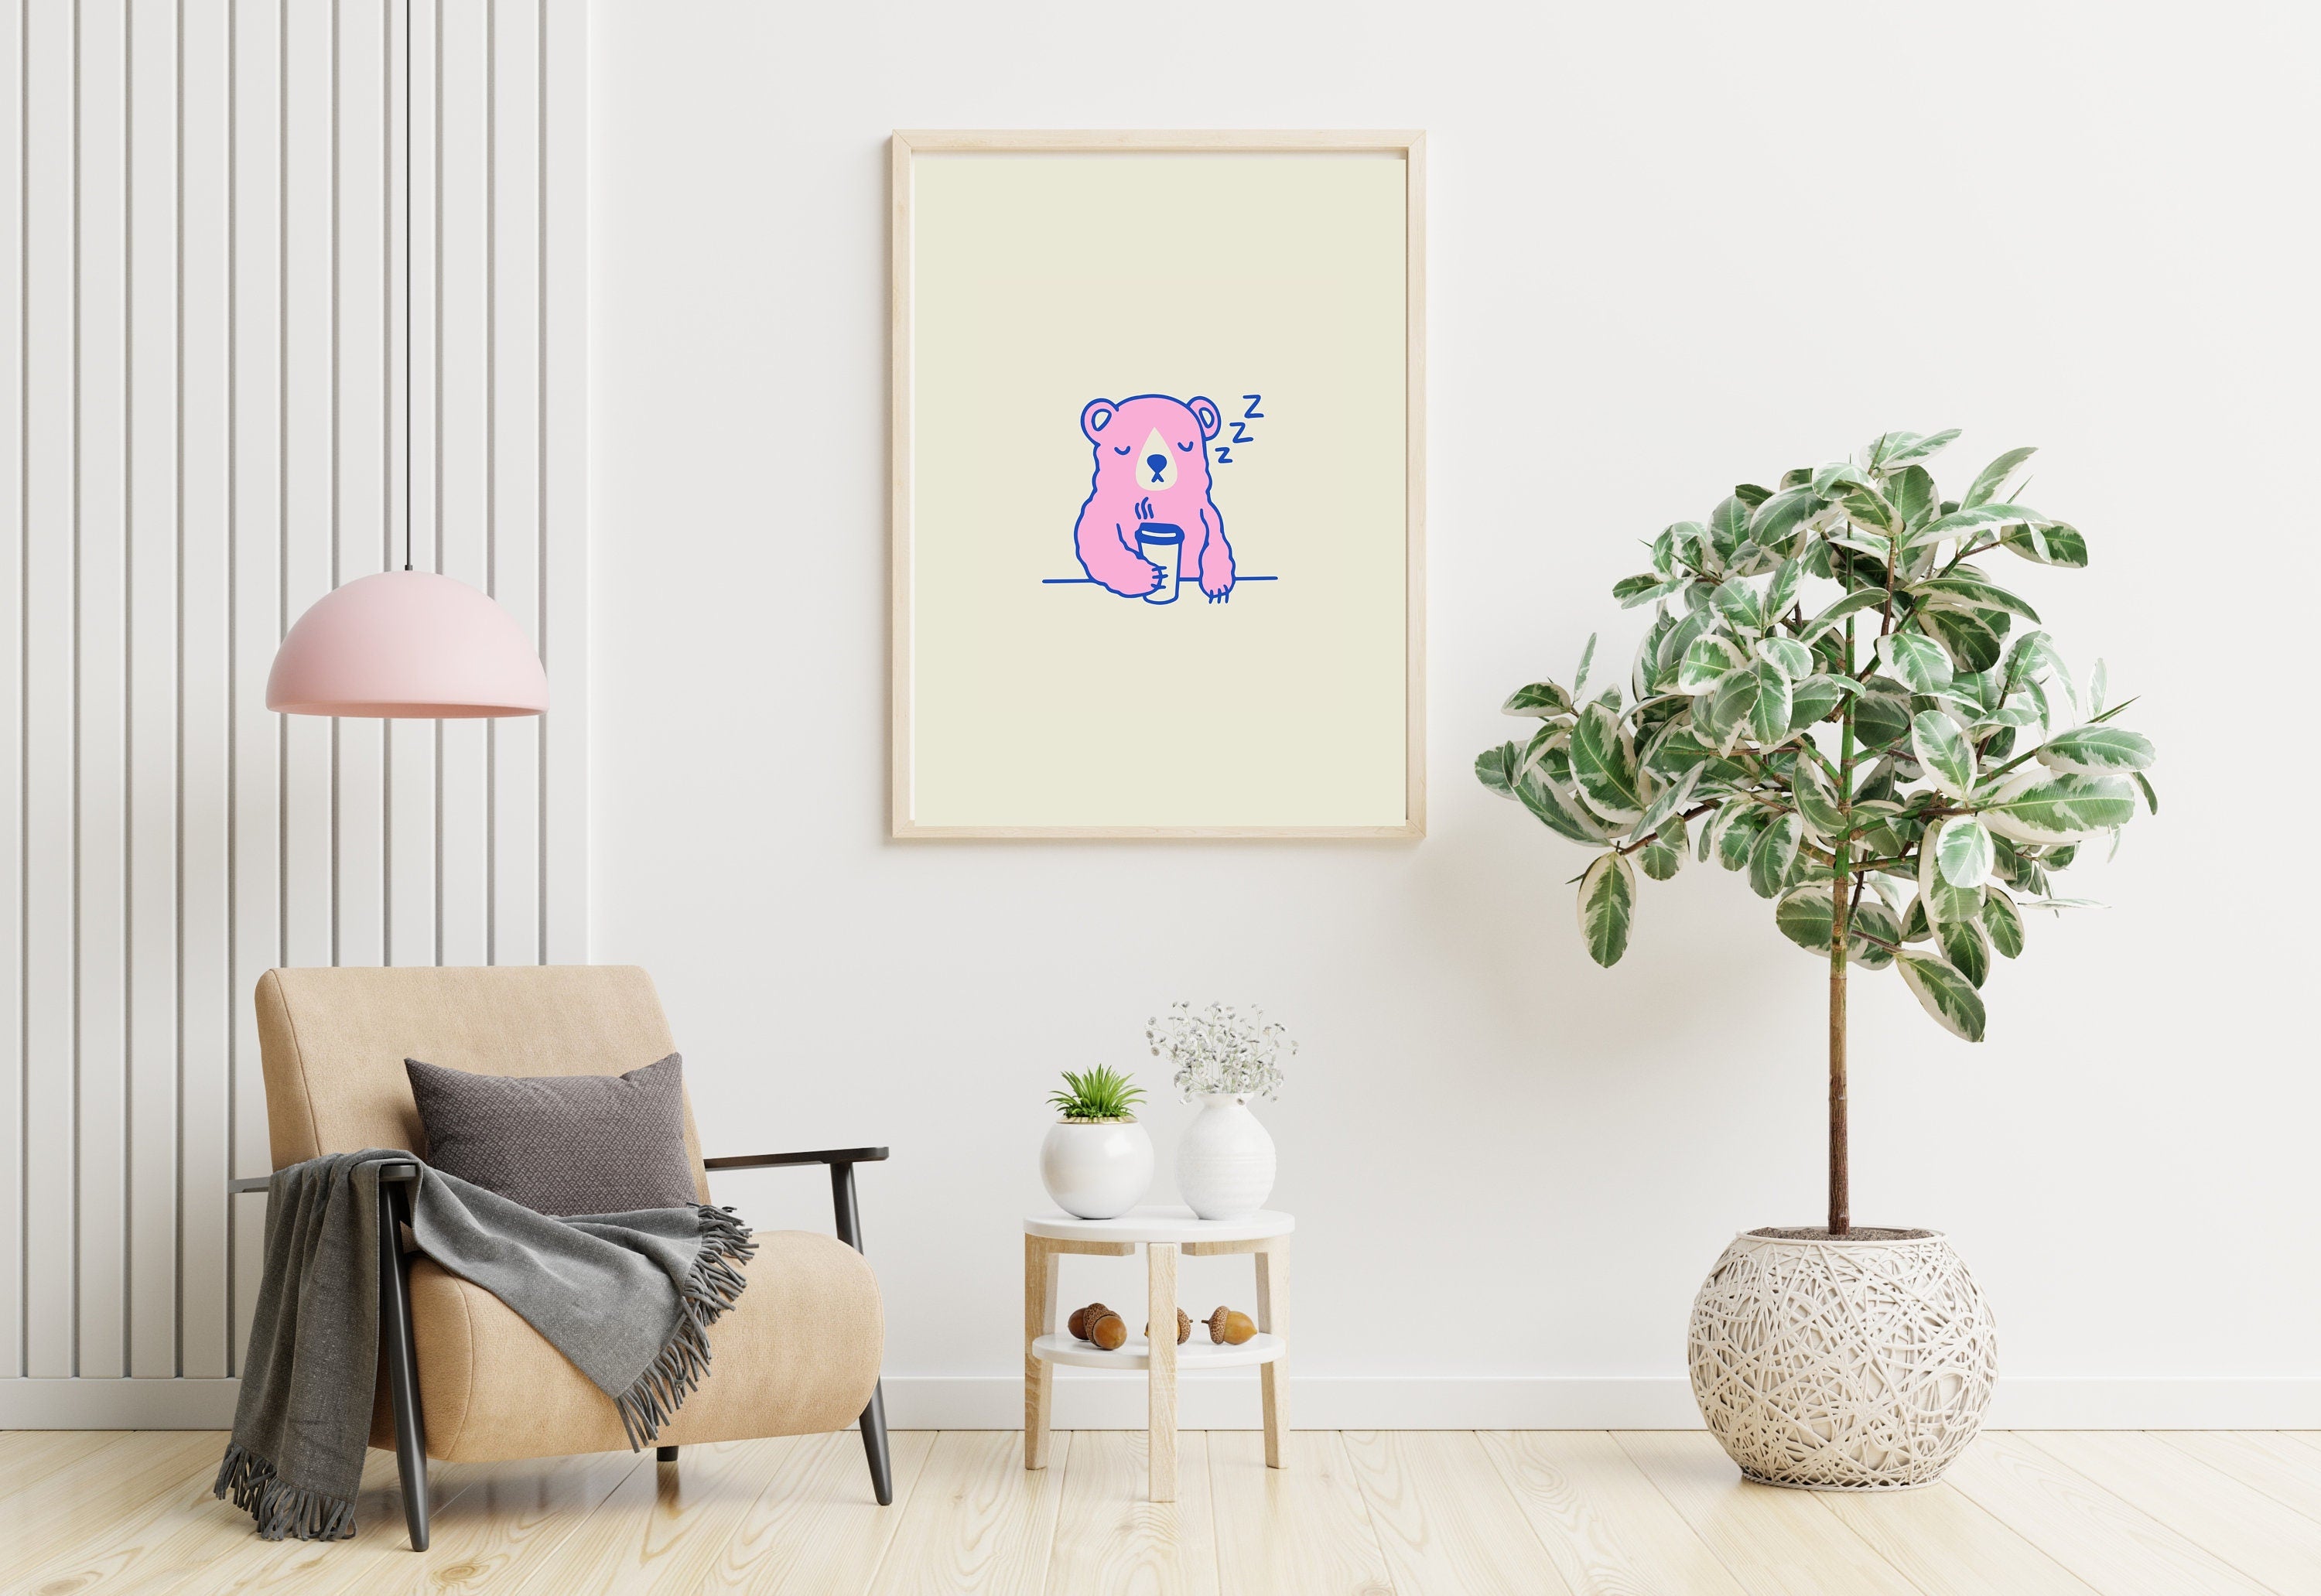 Colorful Cartoon Posters Art Prints featuring playful characters and vibrant designs.